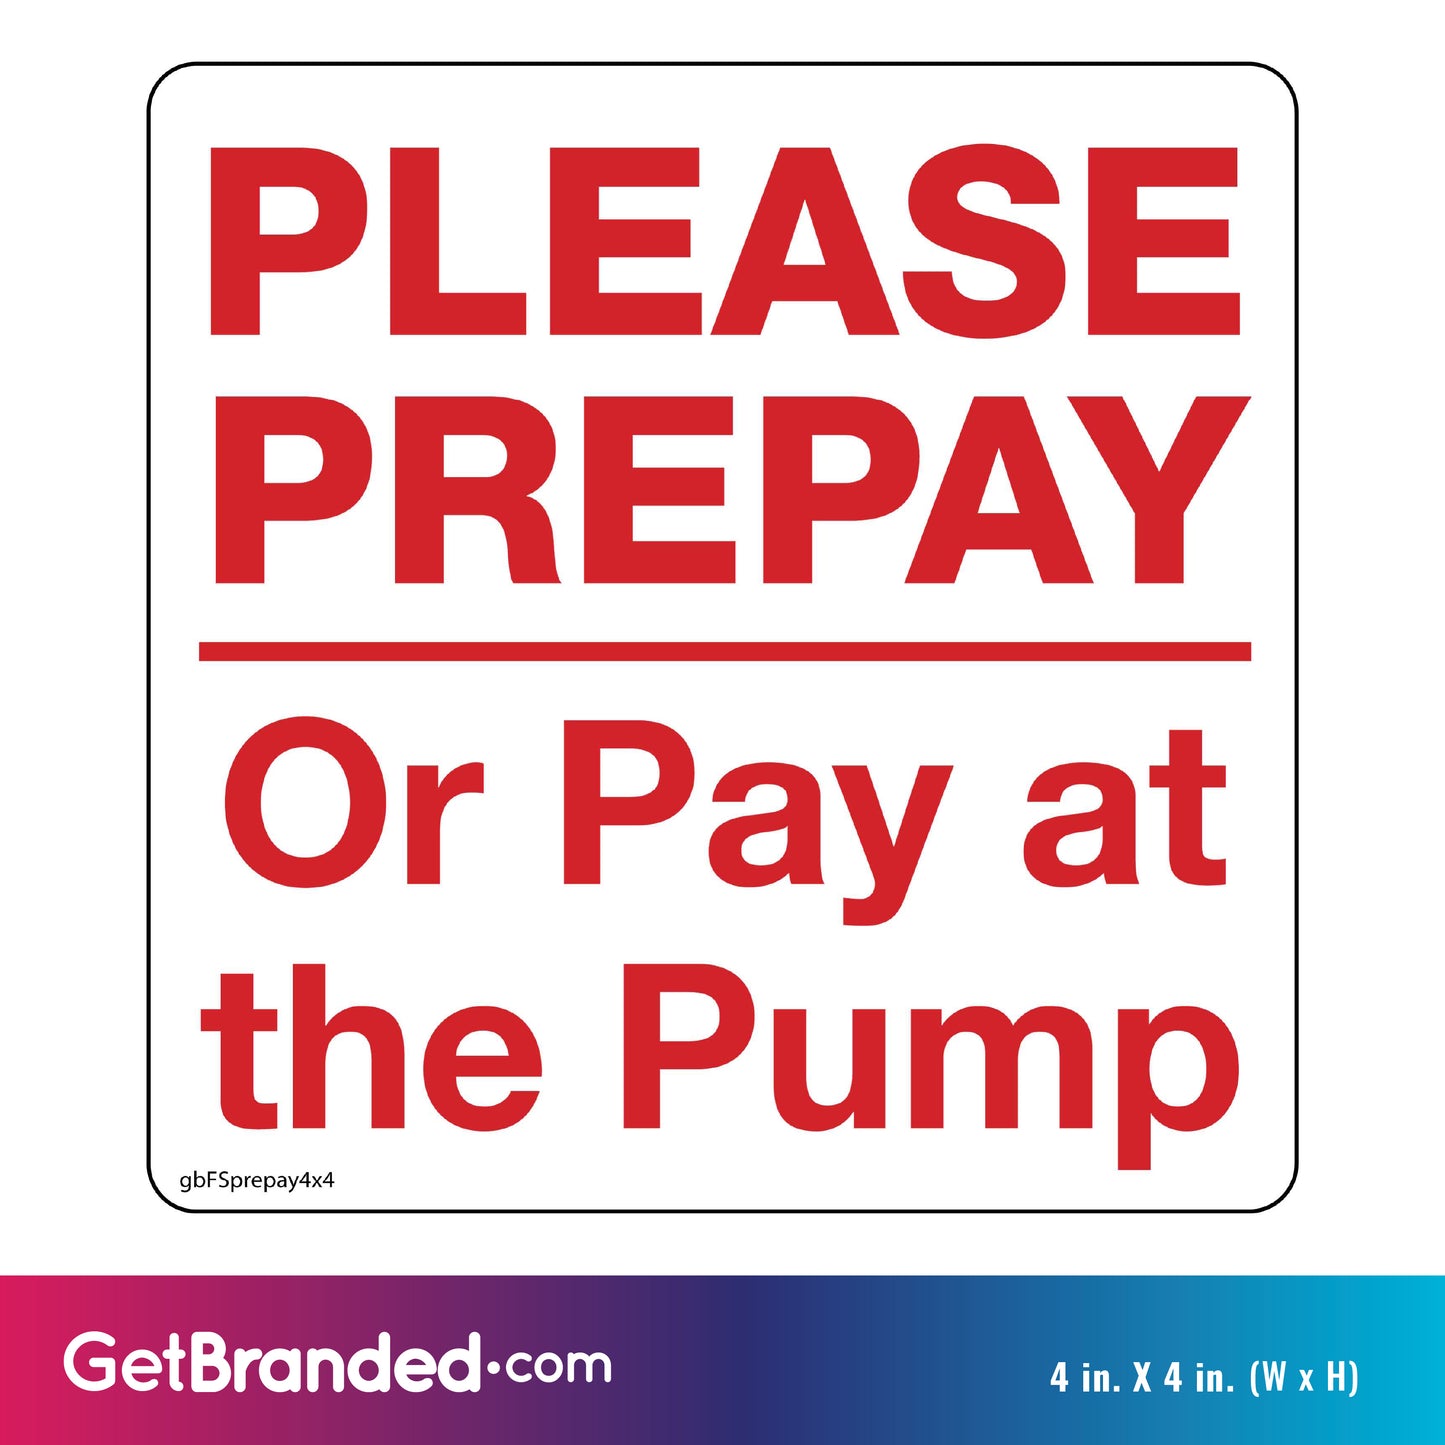 Please Prepay Or Pay At The Pump Decal. 4 inches by 4 inches size guide.